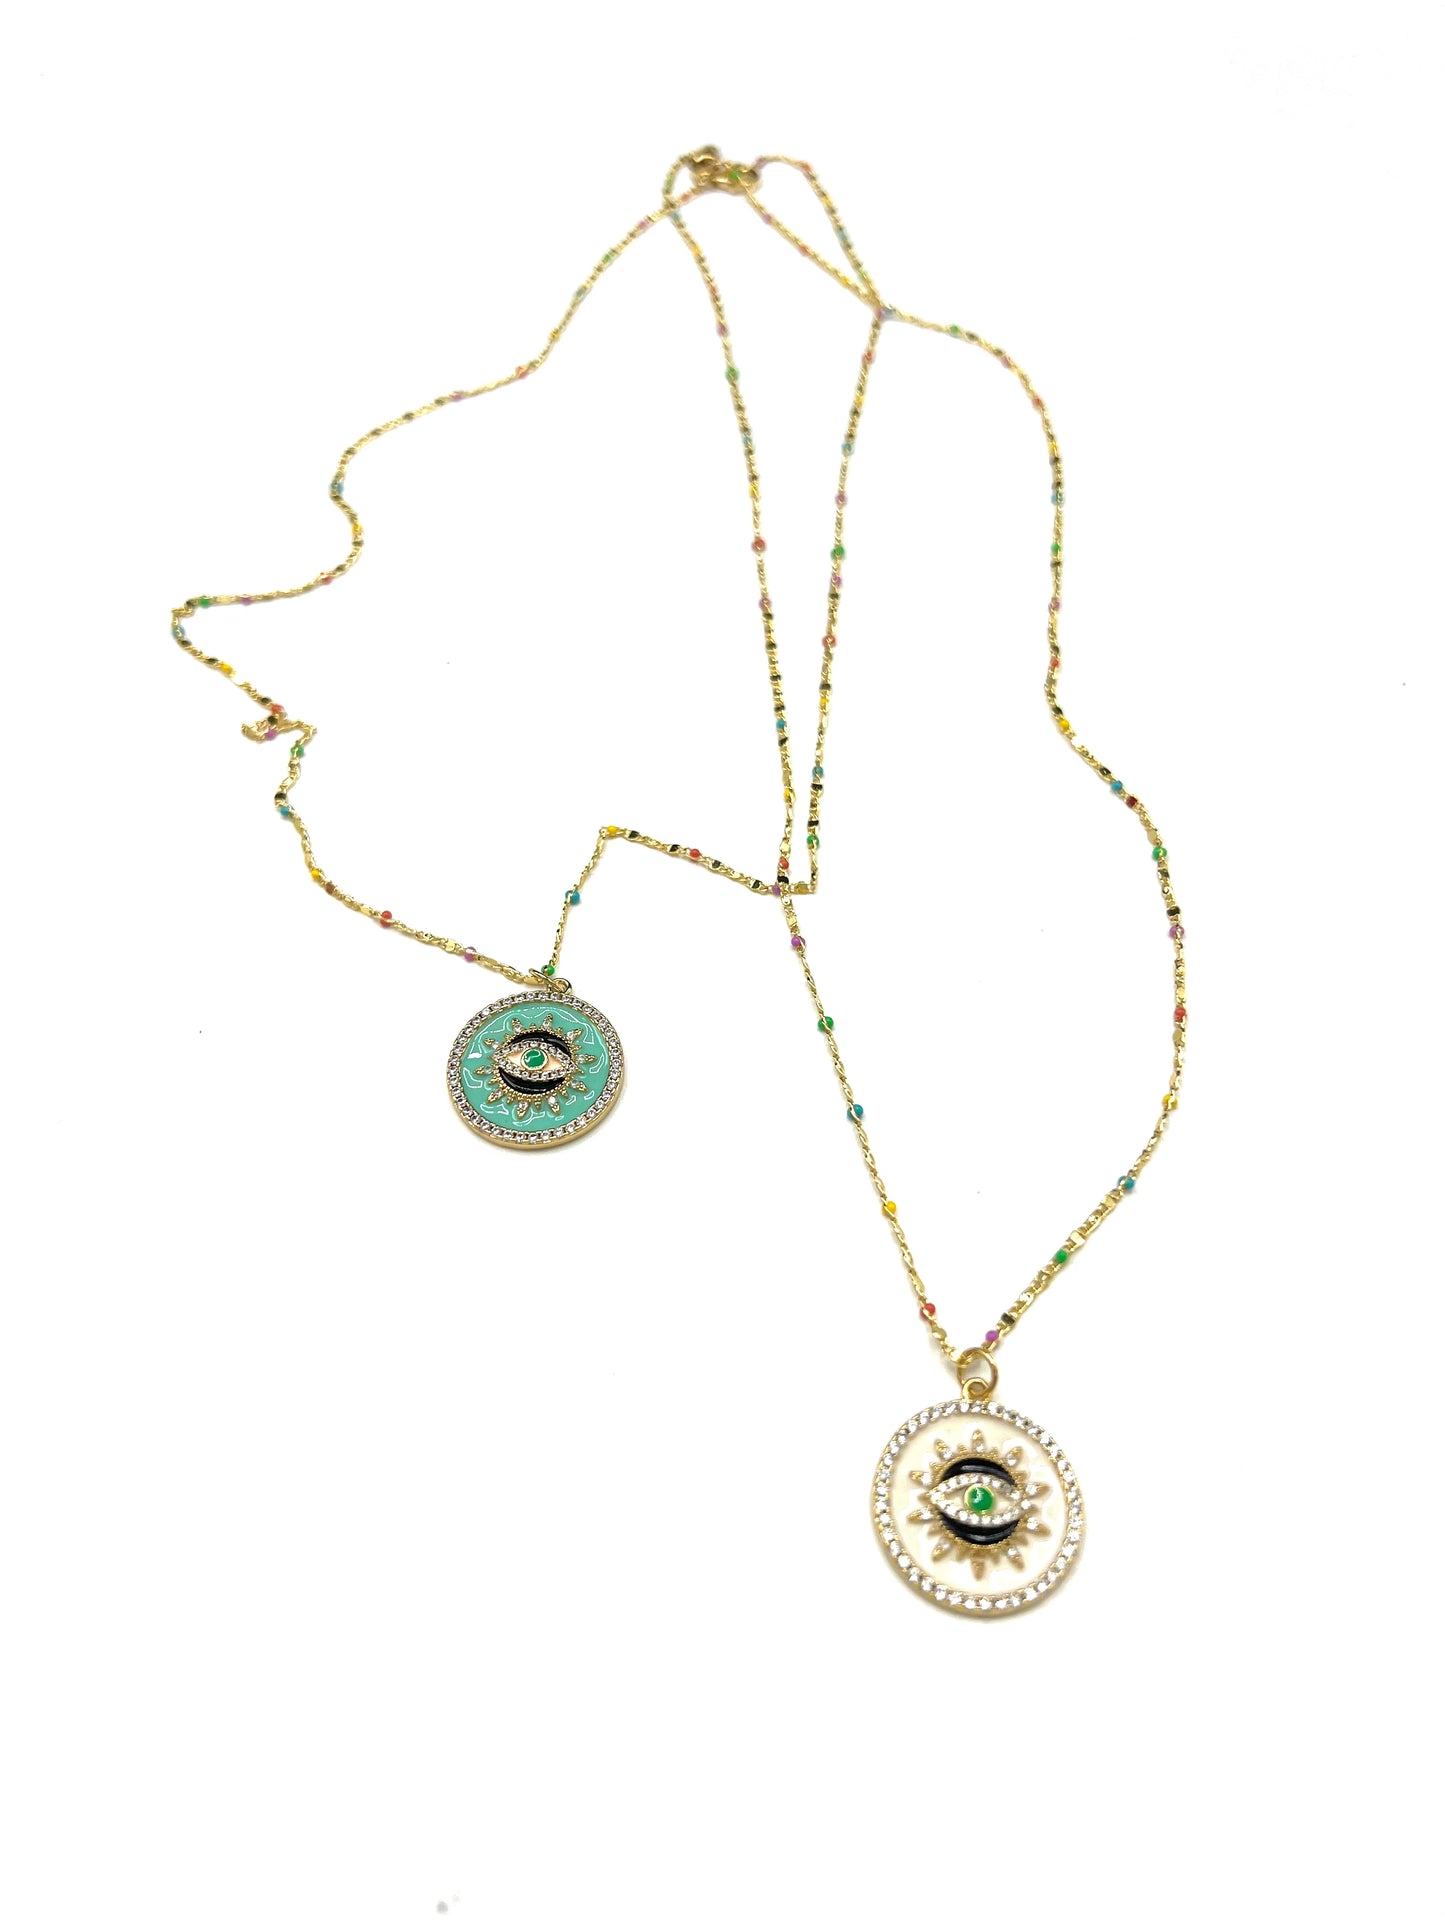 LUCKY EYE CHARM NECKLACE